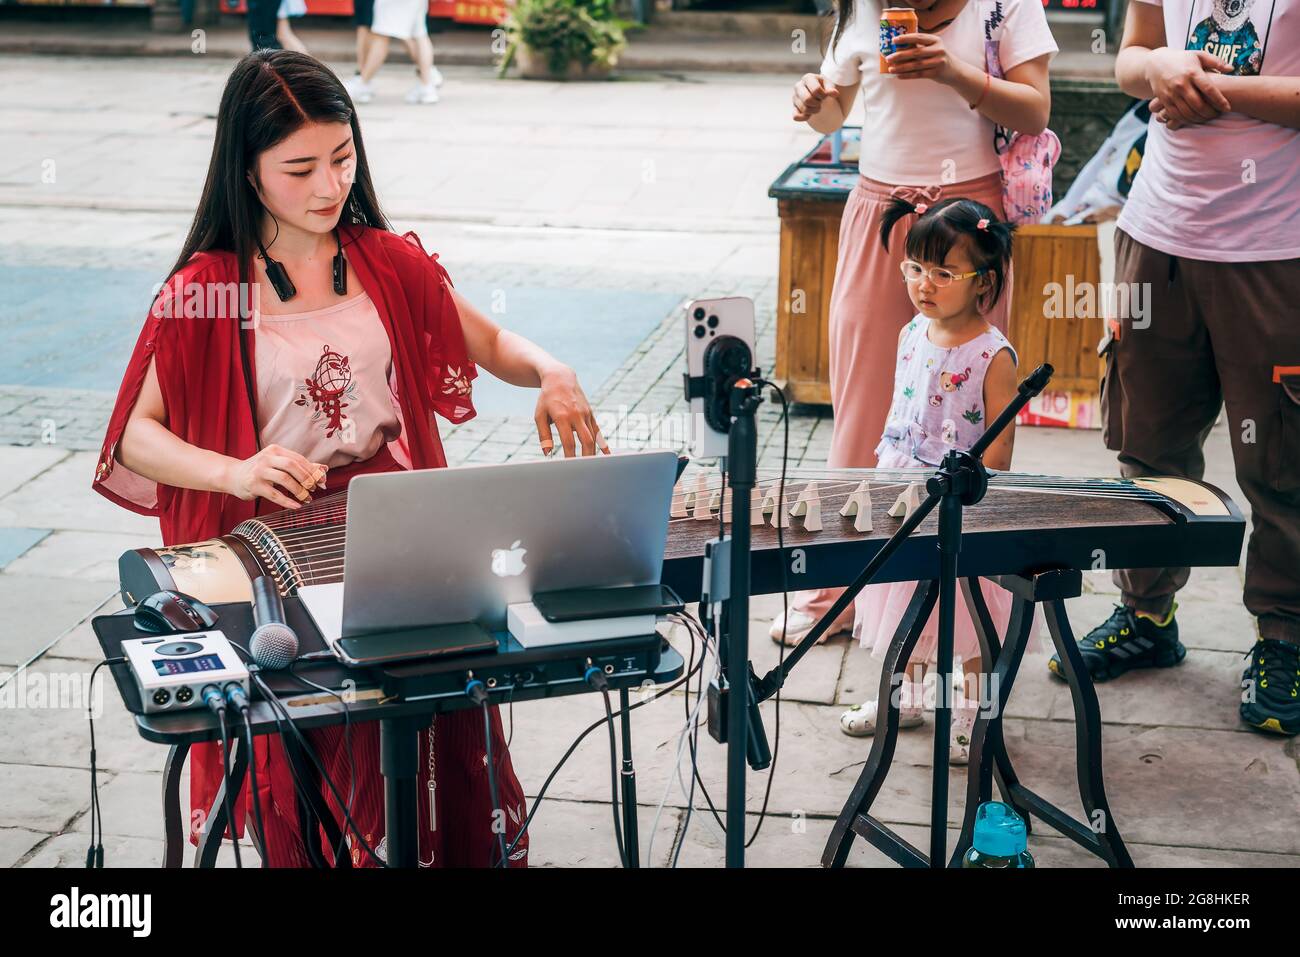 Luodai, Chengdu, Sichuan province, China - June 27, 2021 : Little girl watching a young chinese woman playing guzheng in the street Stock Photo